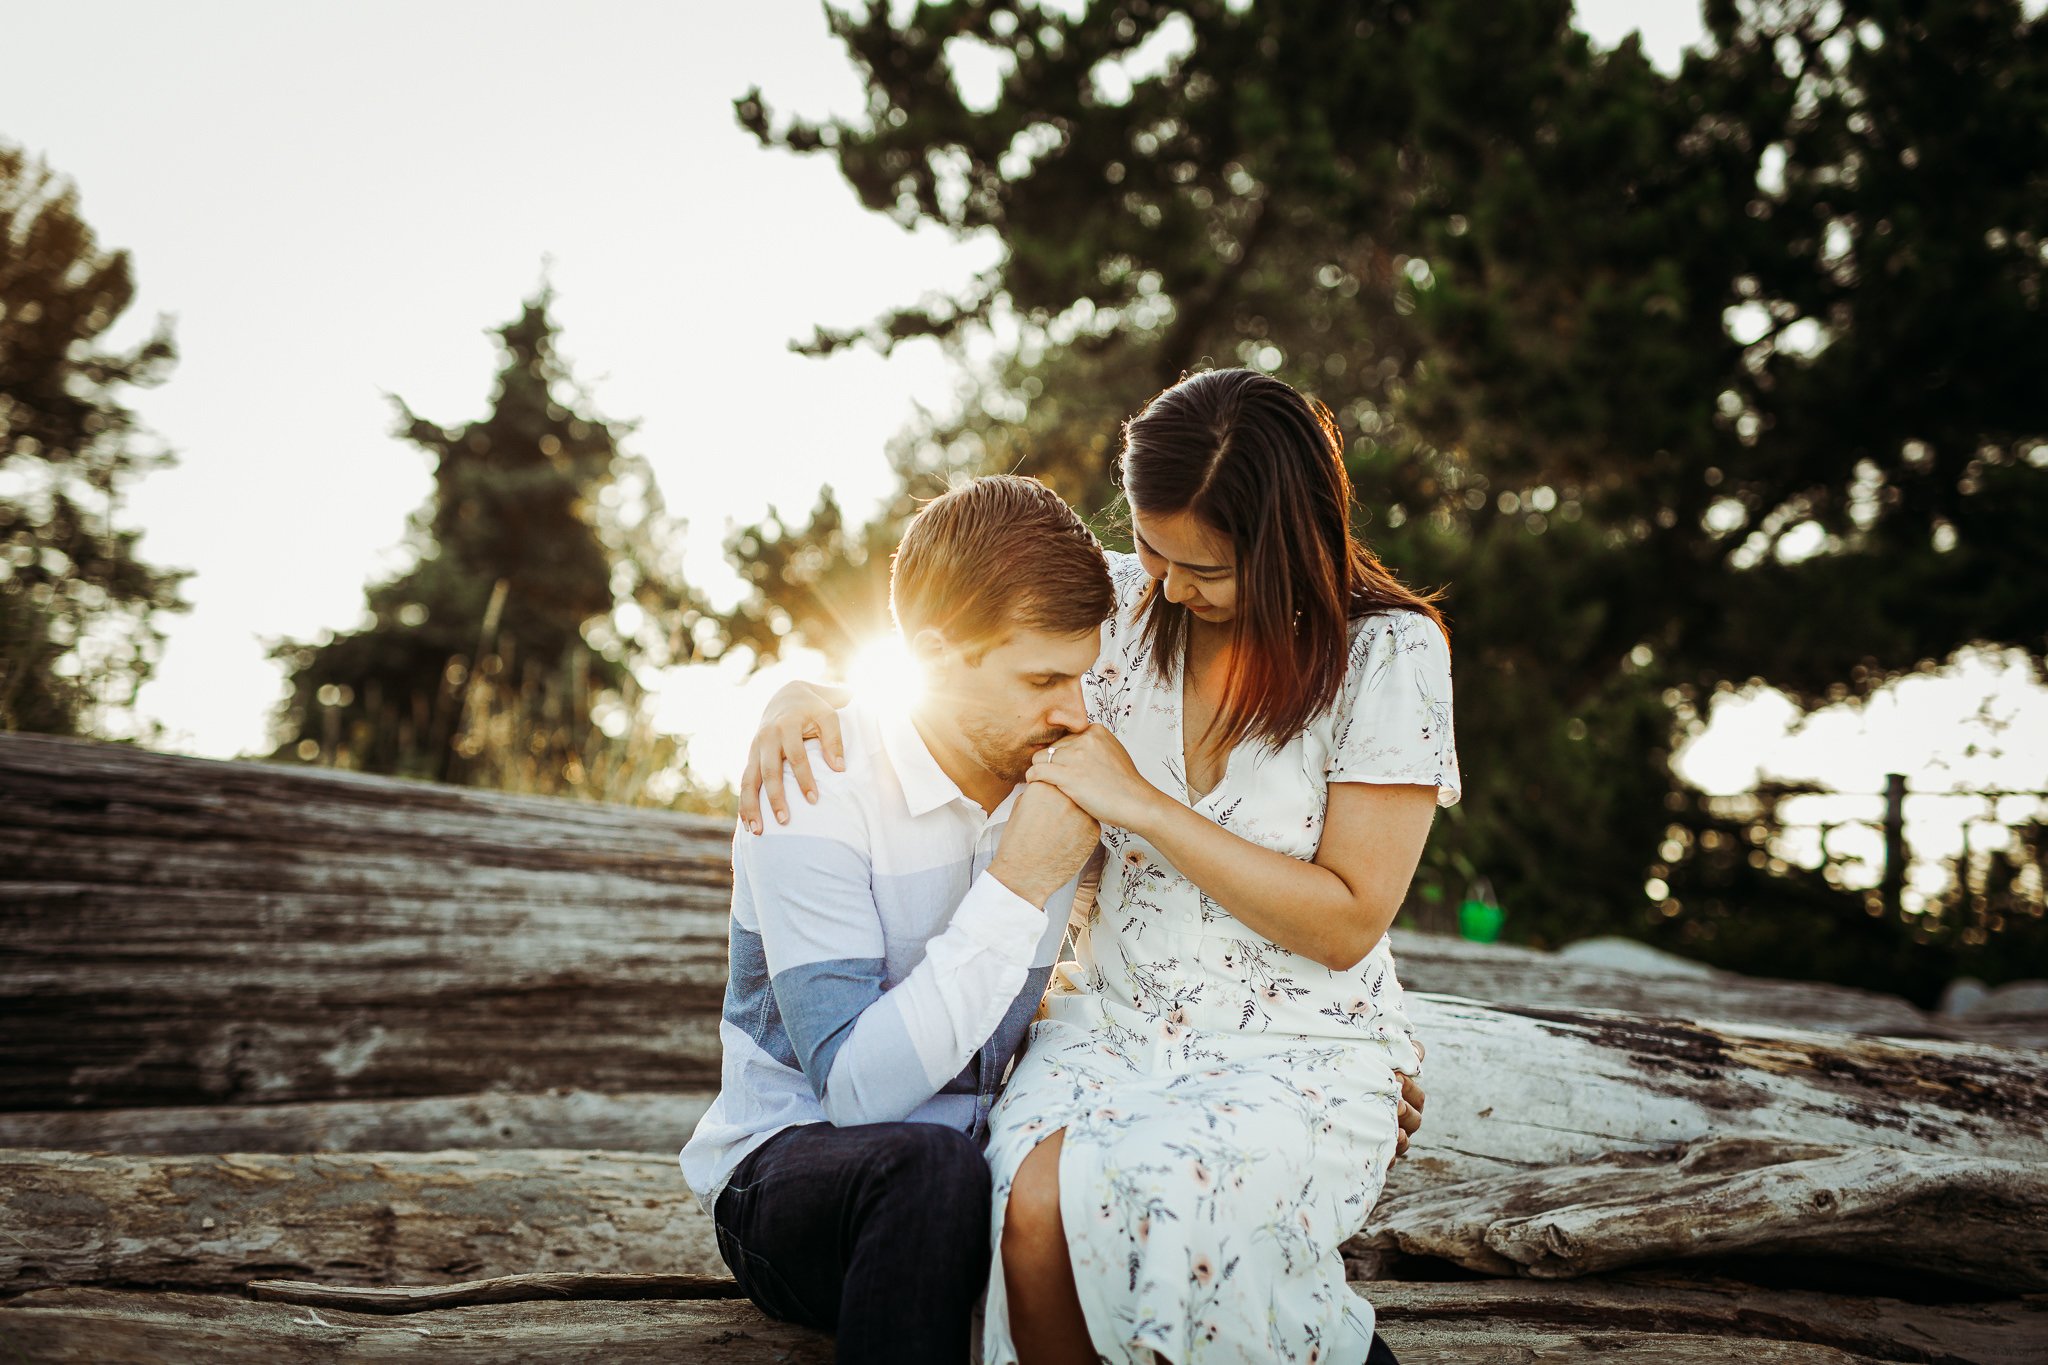 Sunset Engagement Photography in Vancouver, BC